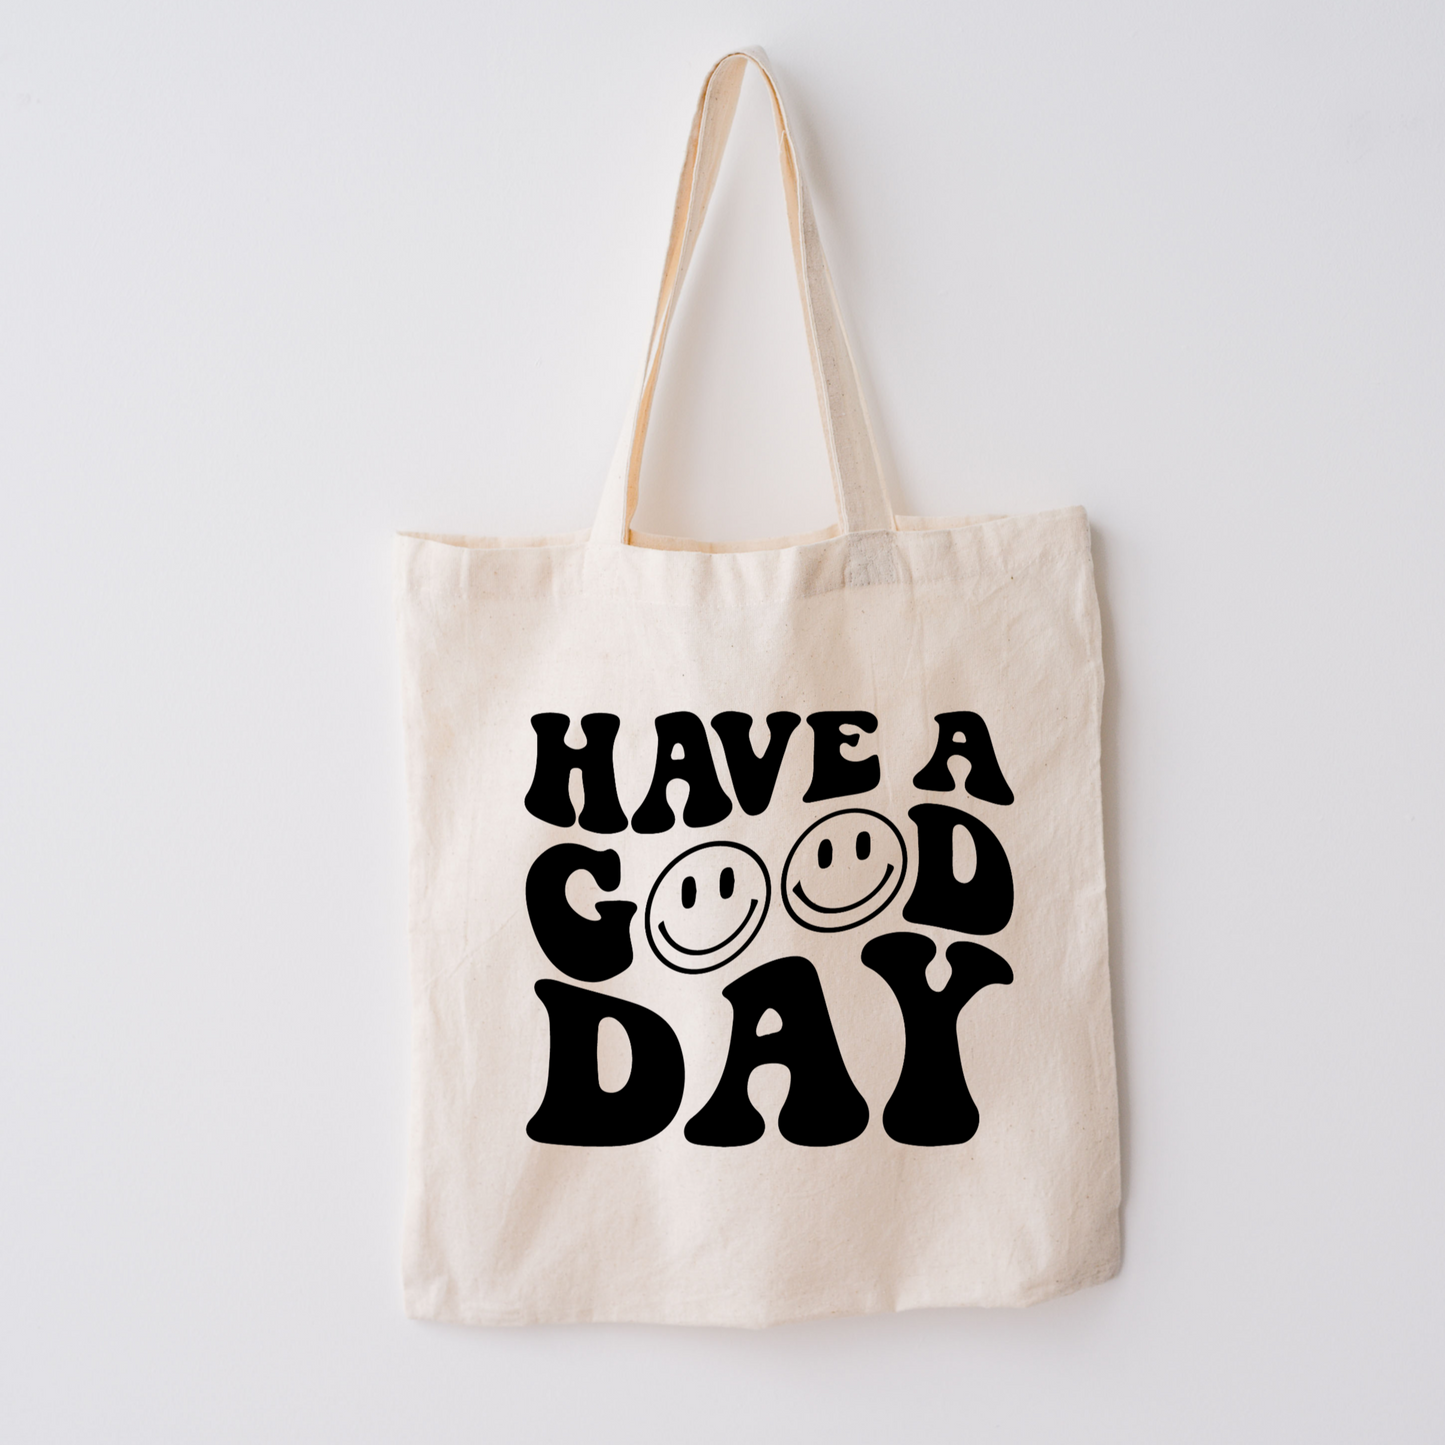 Have A Good Day Cotton Tote